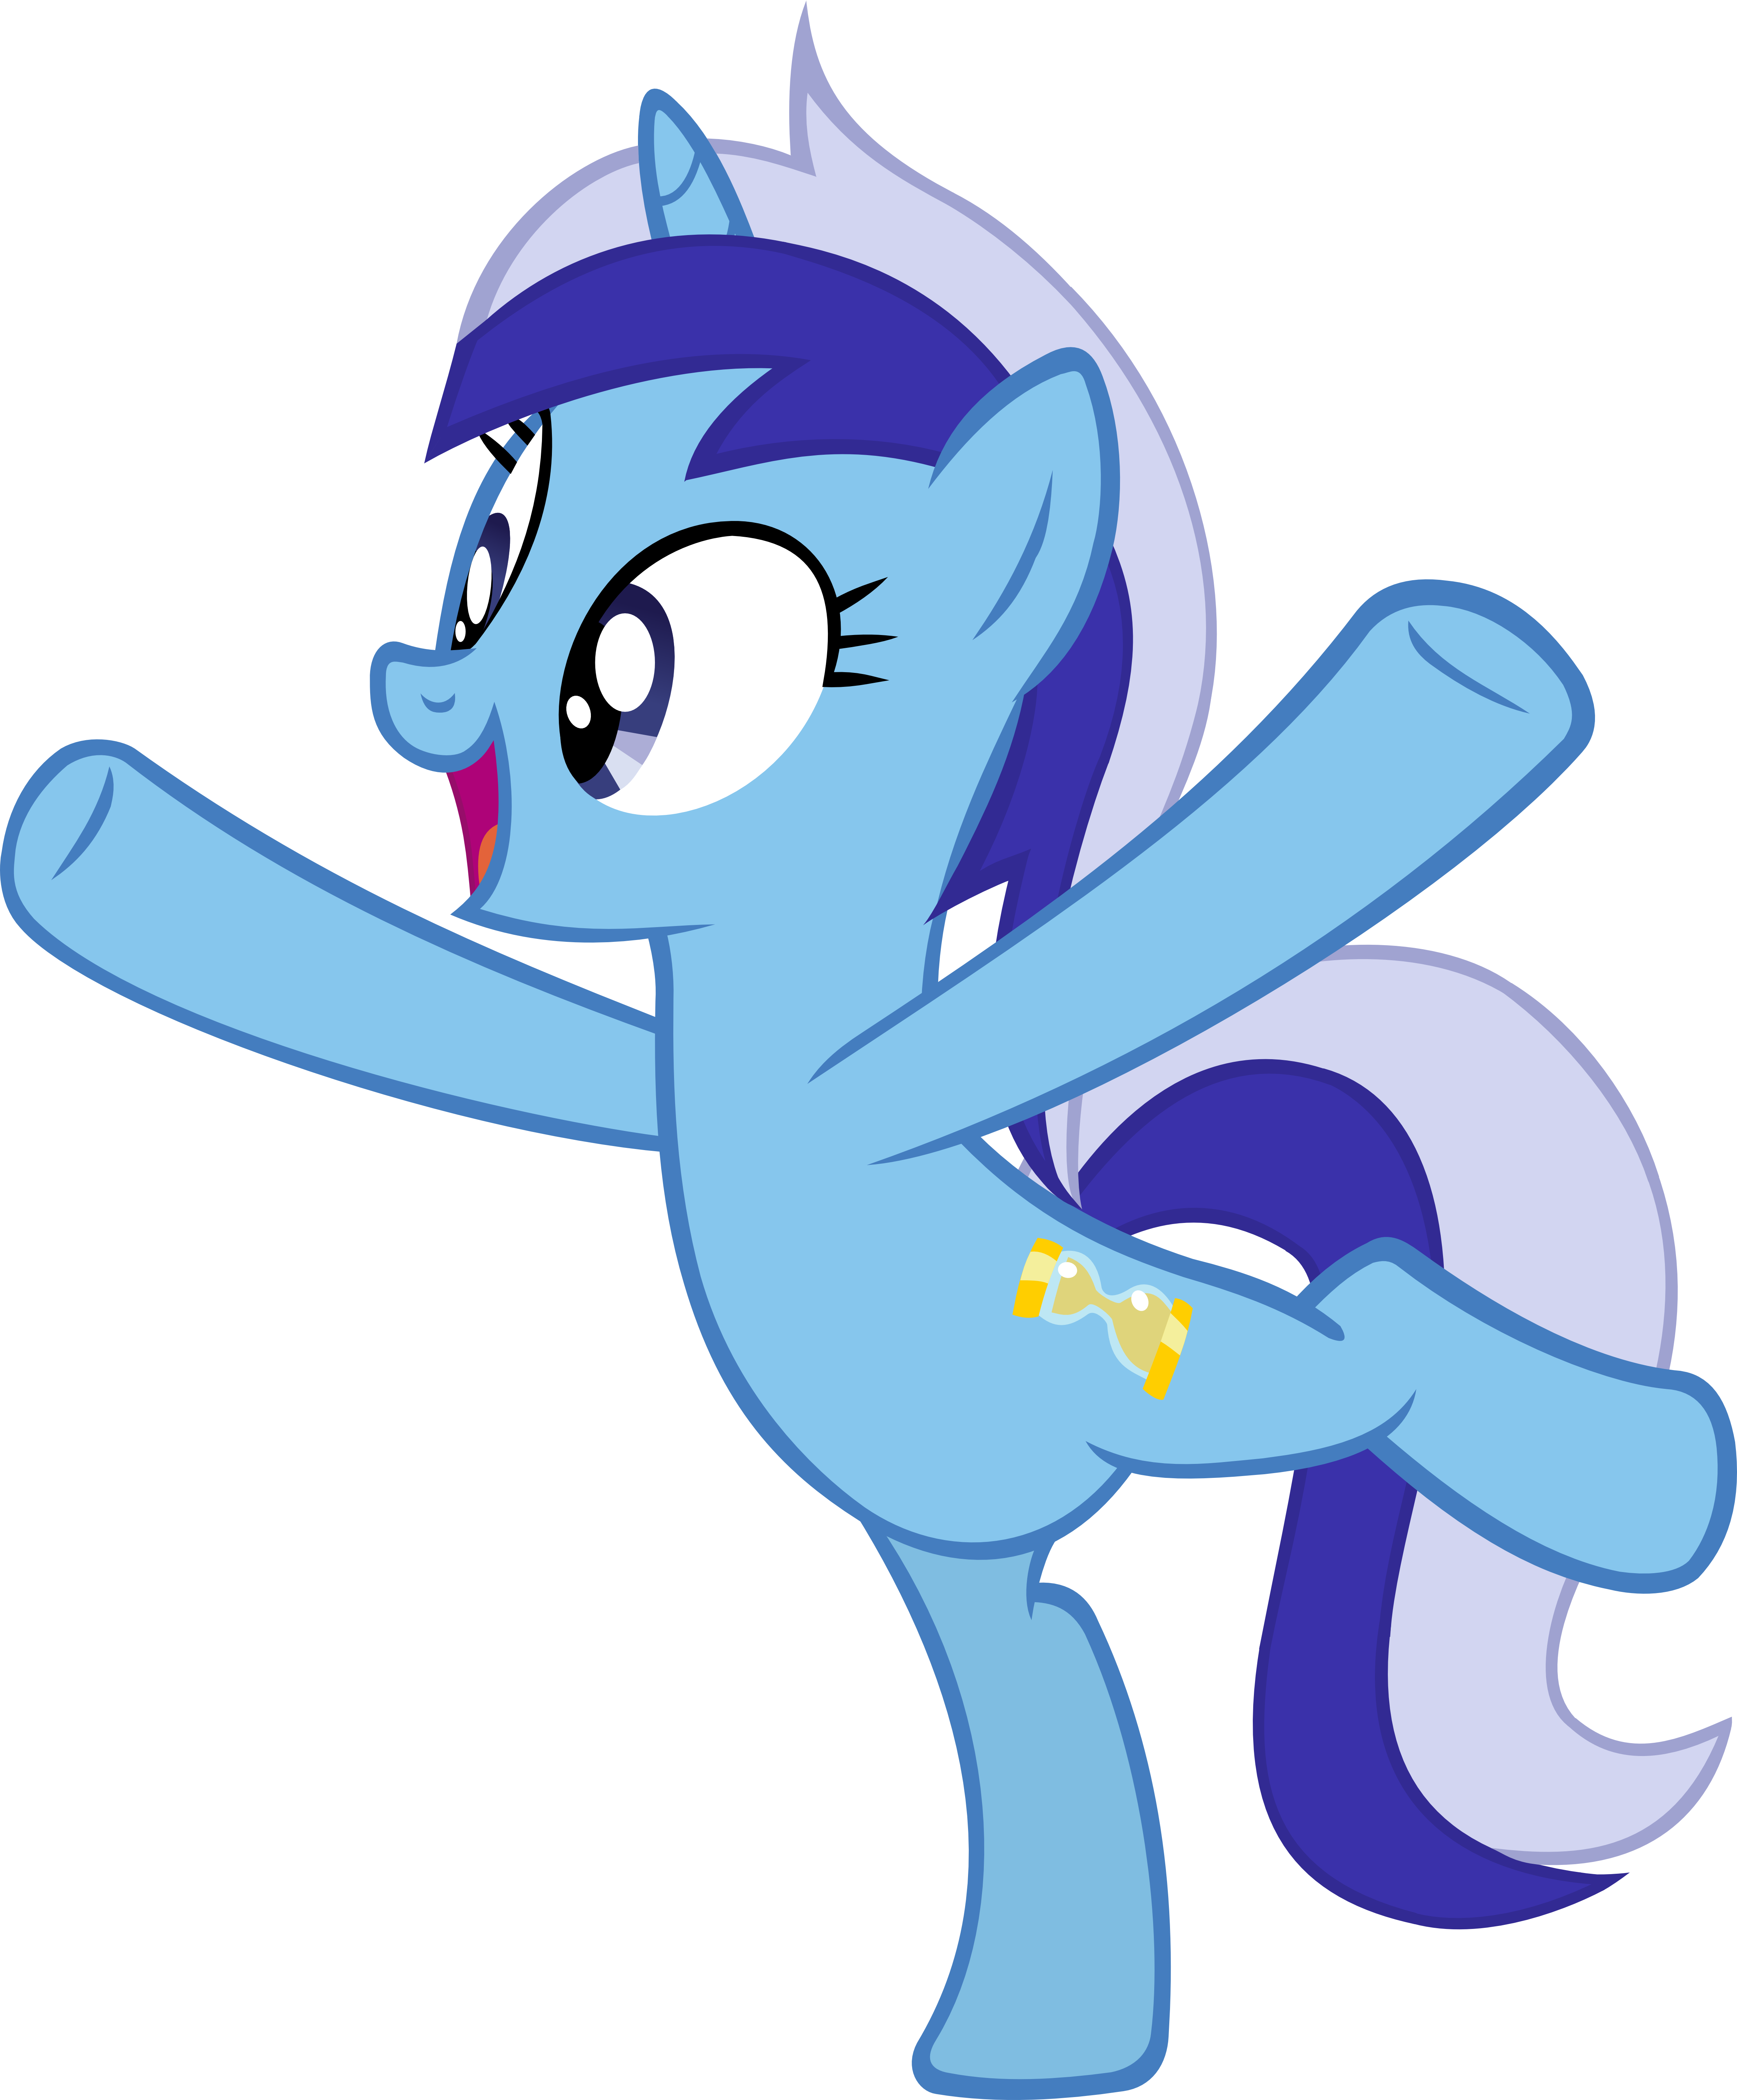 minuette_on_one_leg_by_ironm17-dbu17gg.p